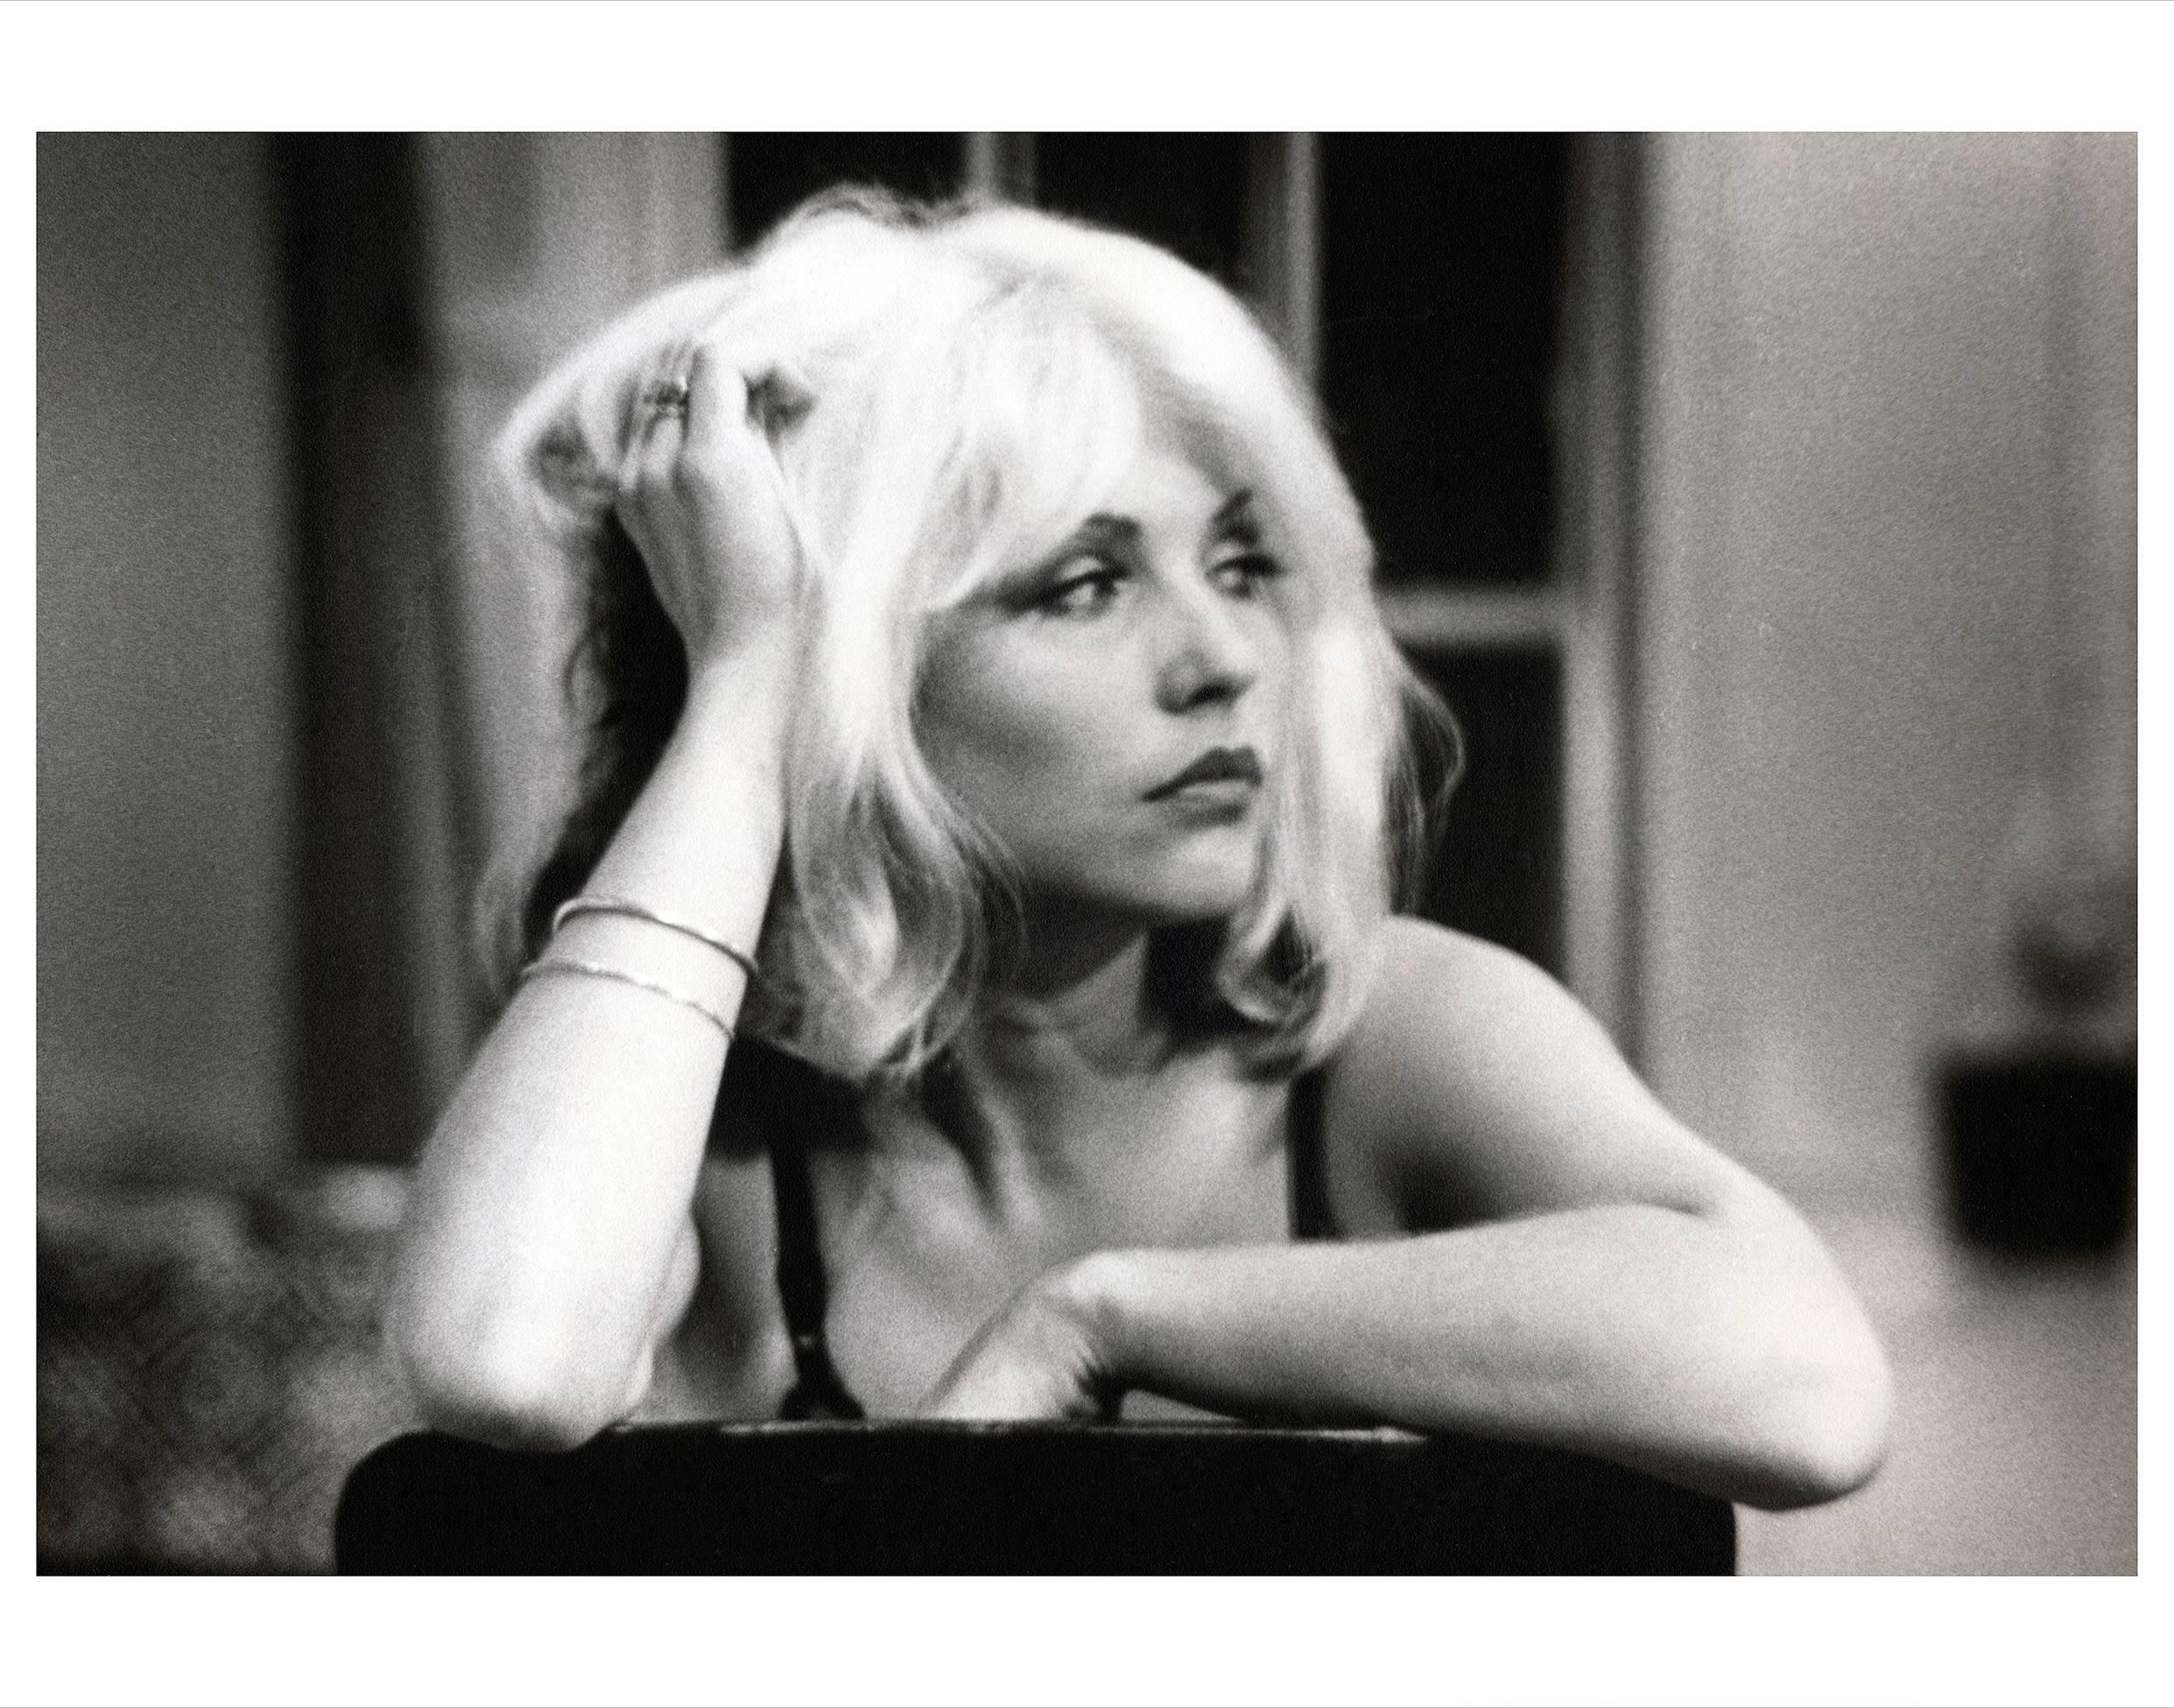 Fernando Natalici Black and White Photograph - Debbie Harry photograph (on the set of Unmade Beds), New York, 1976